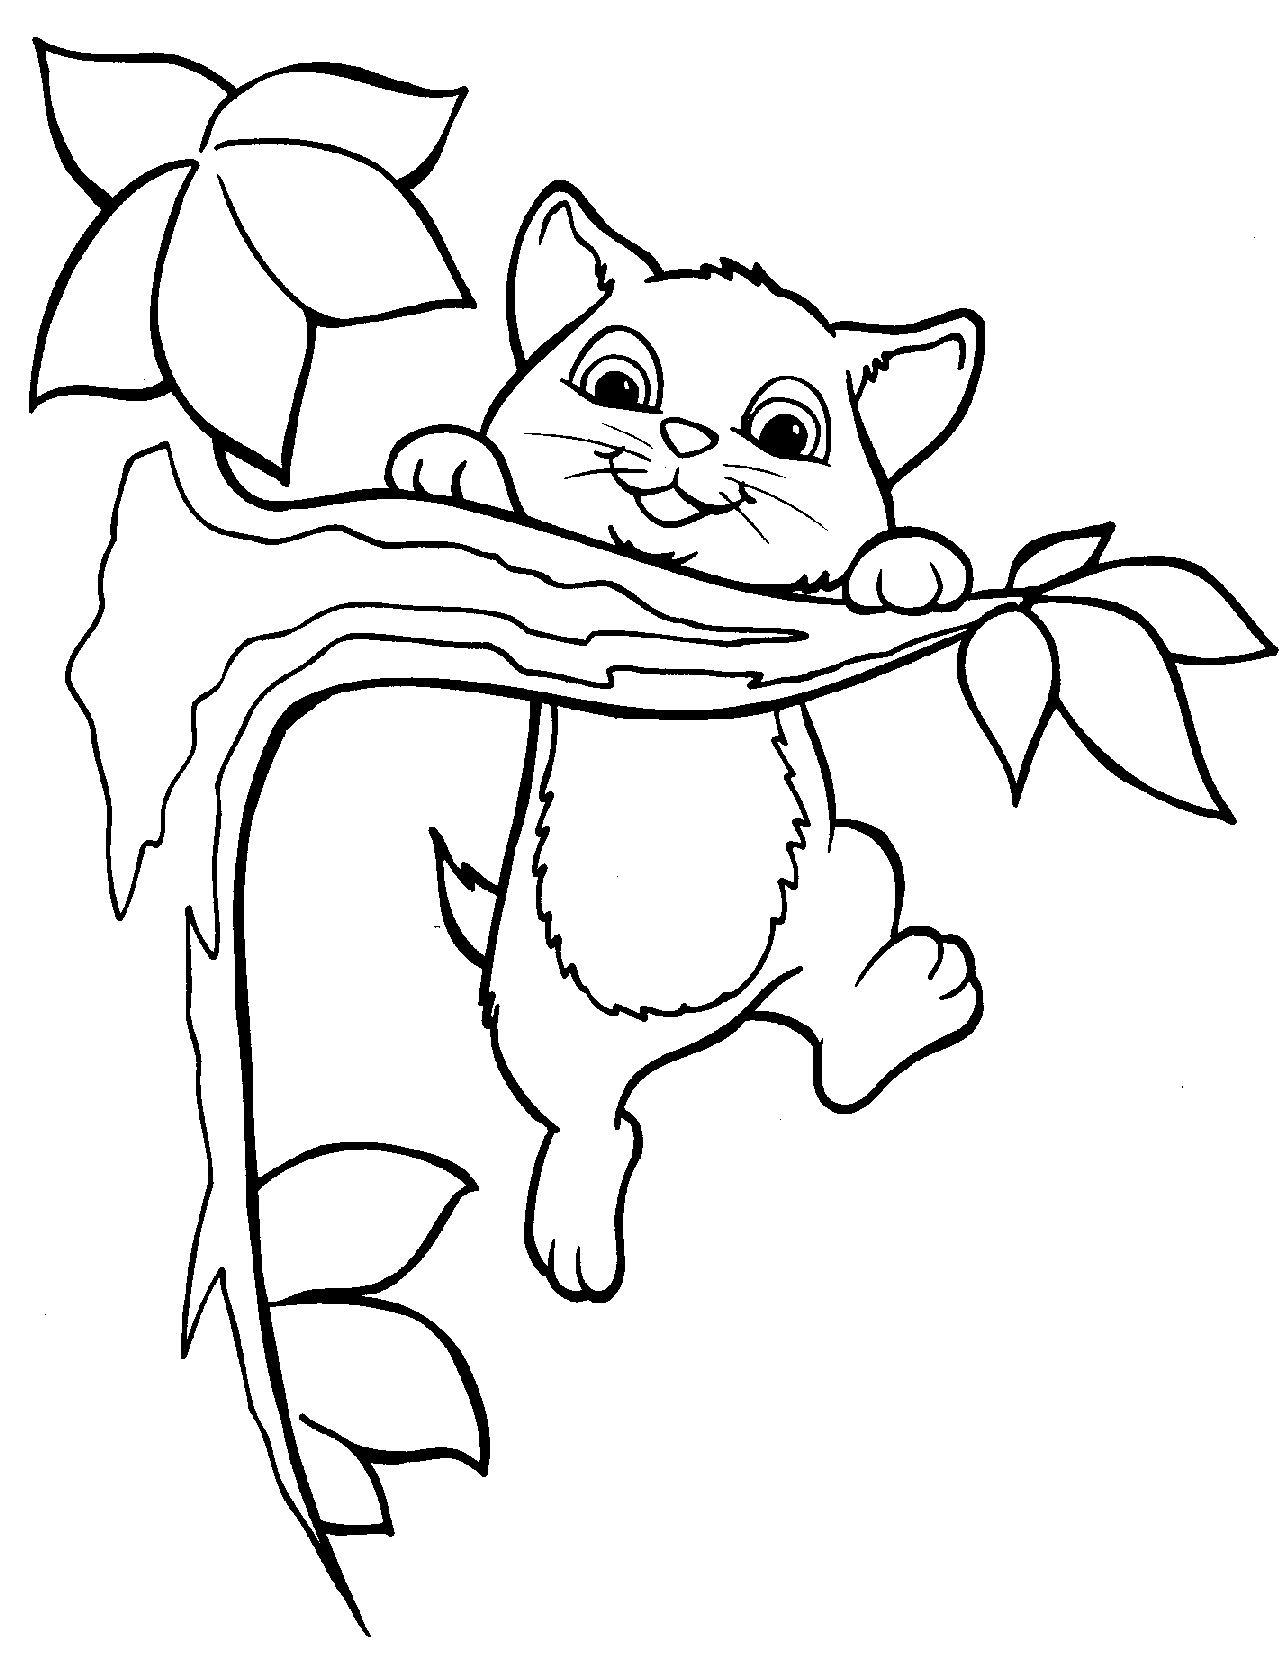 Cute Cat Coloring Pages drawing free image download